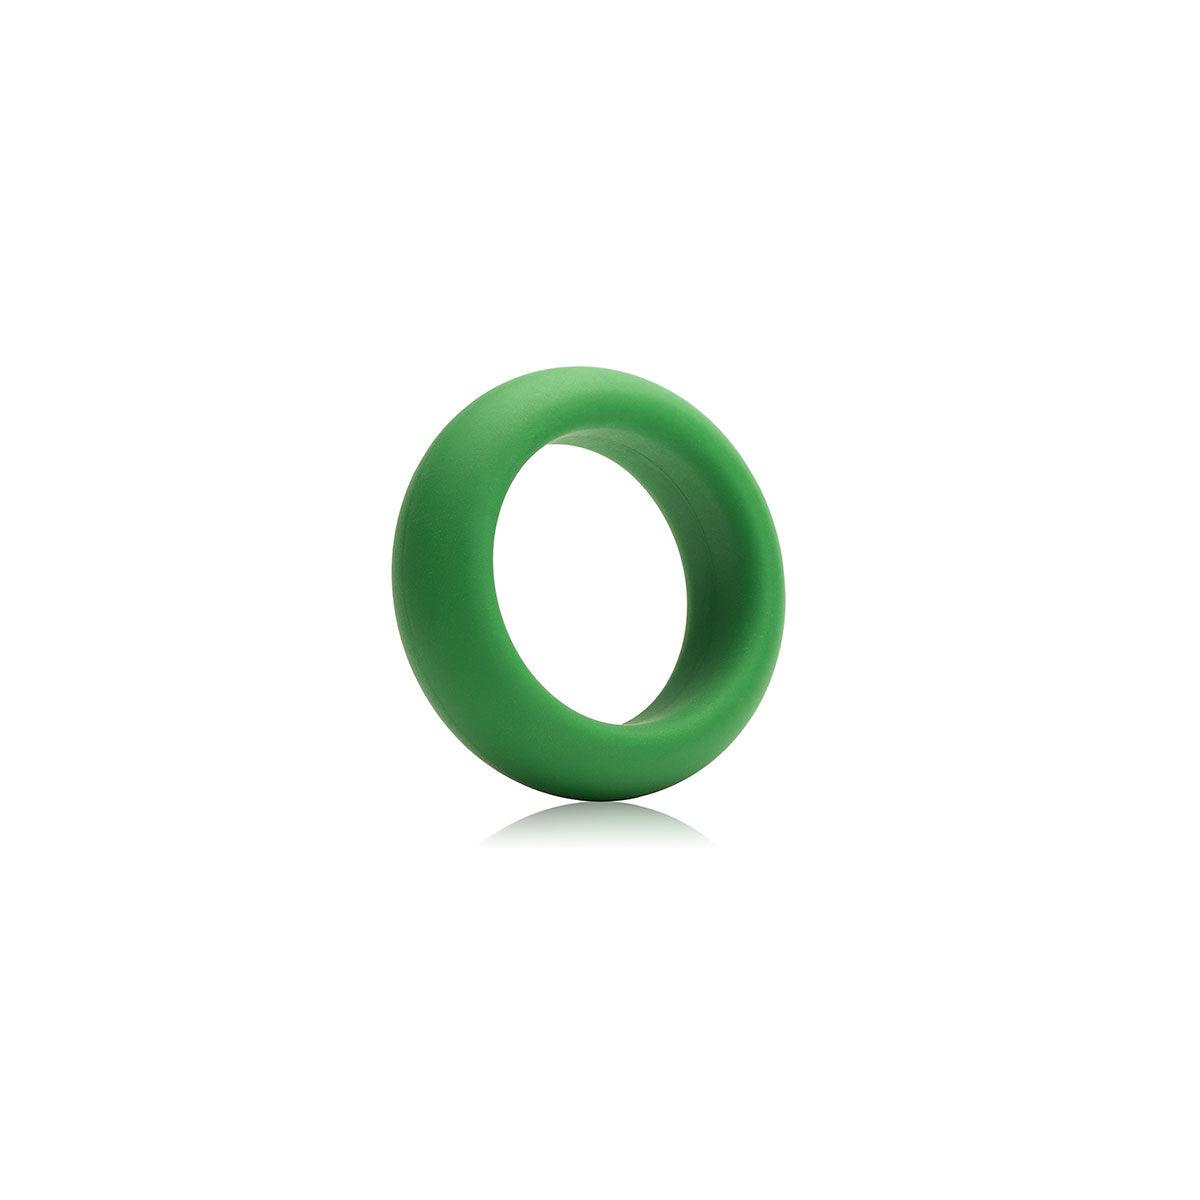 Je Joue Silicone C-Ring Level 2 - Green - shop enby